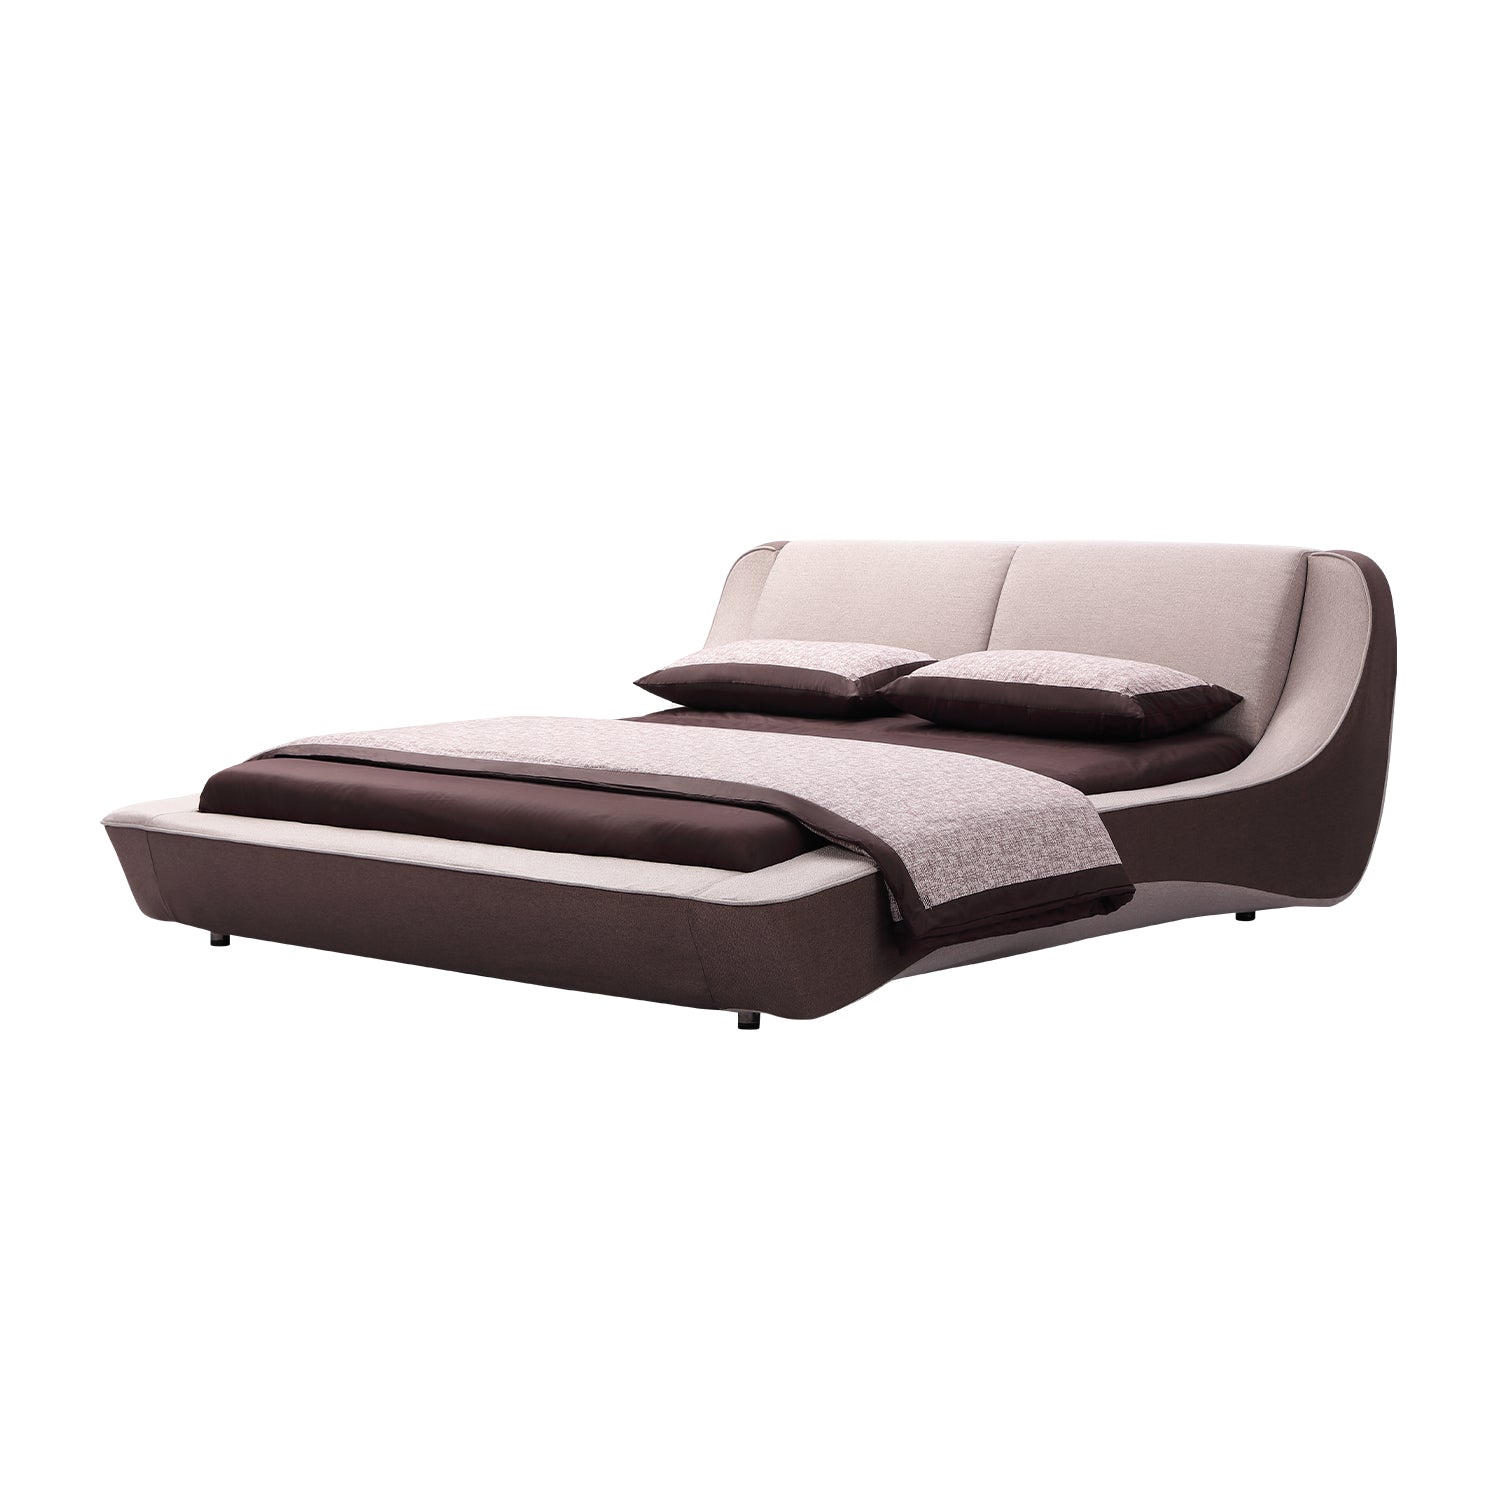 DeRUCCI bed frame model BZZ4 - 198 with beige upholstered headboard and brown leather frame, inspired by sports cars and modern design, featuring matching bedding and pillows.